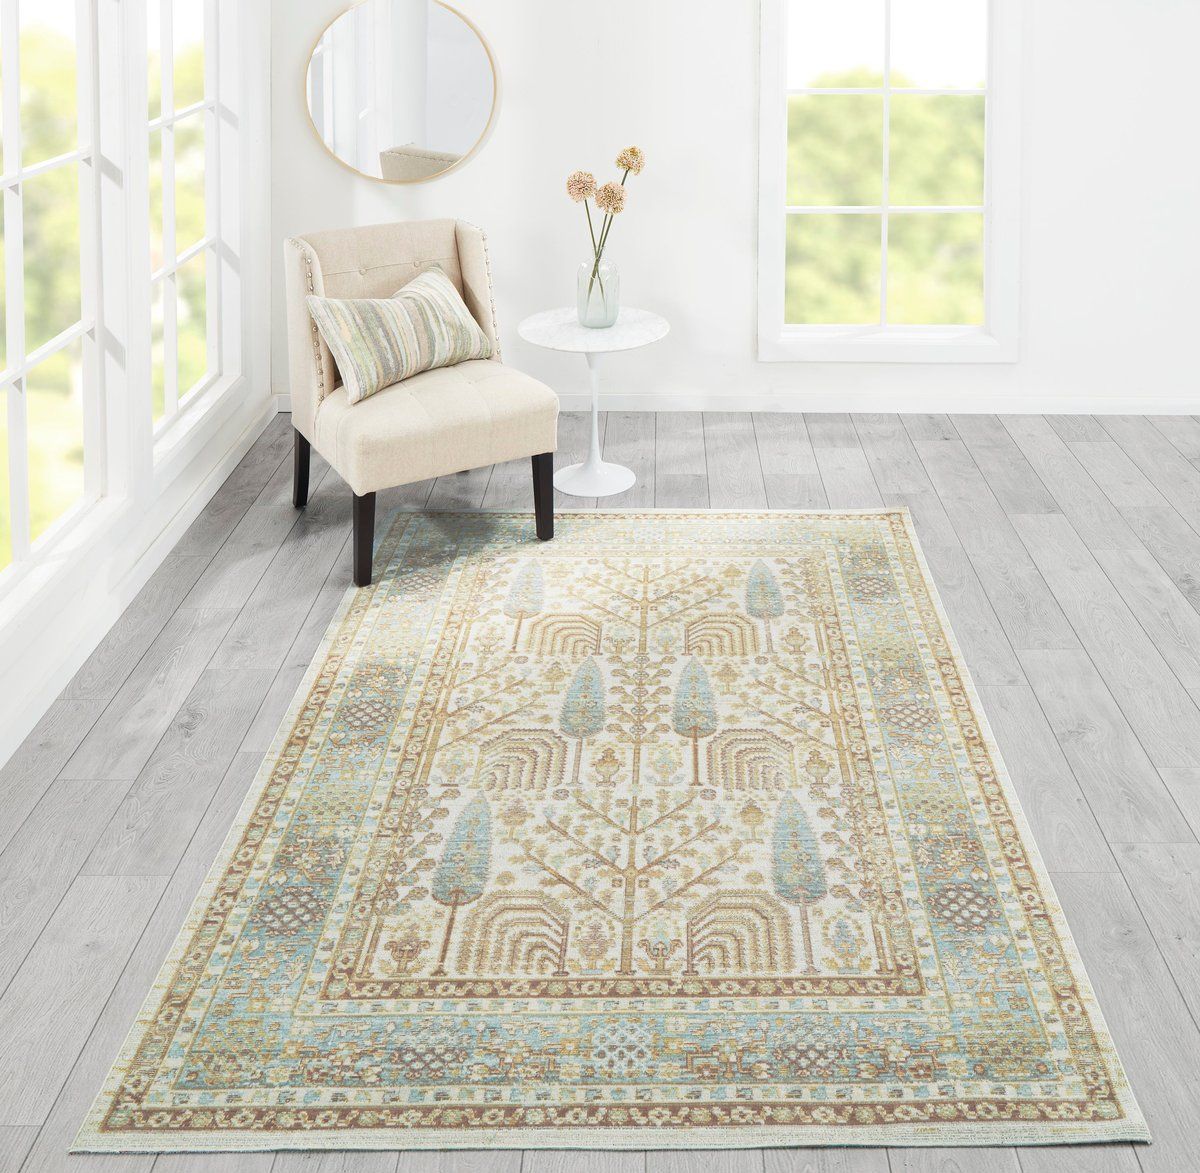 Isabella - ISA-8 Area Rug | Rugs Direct